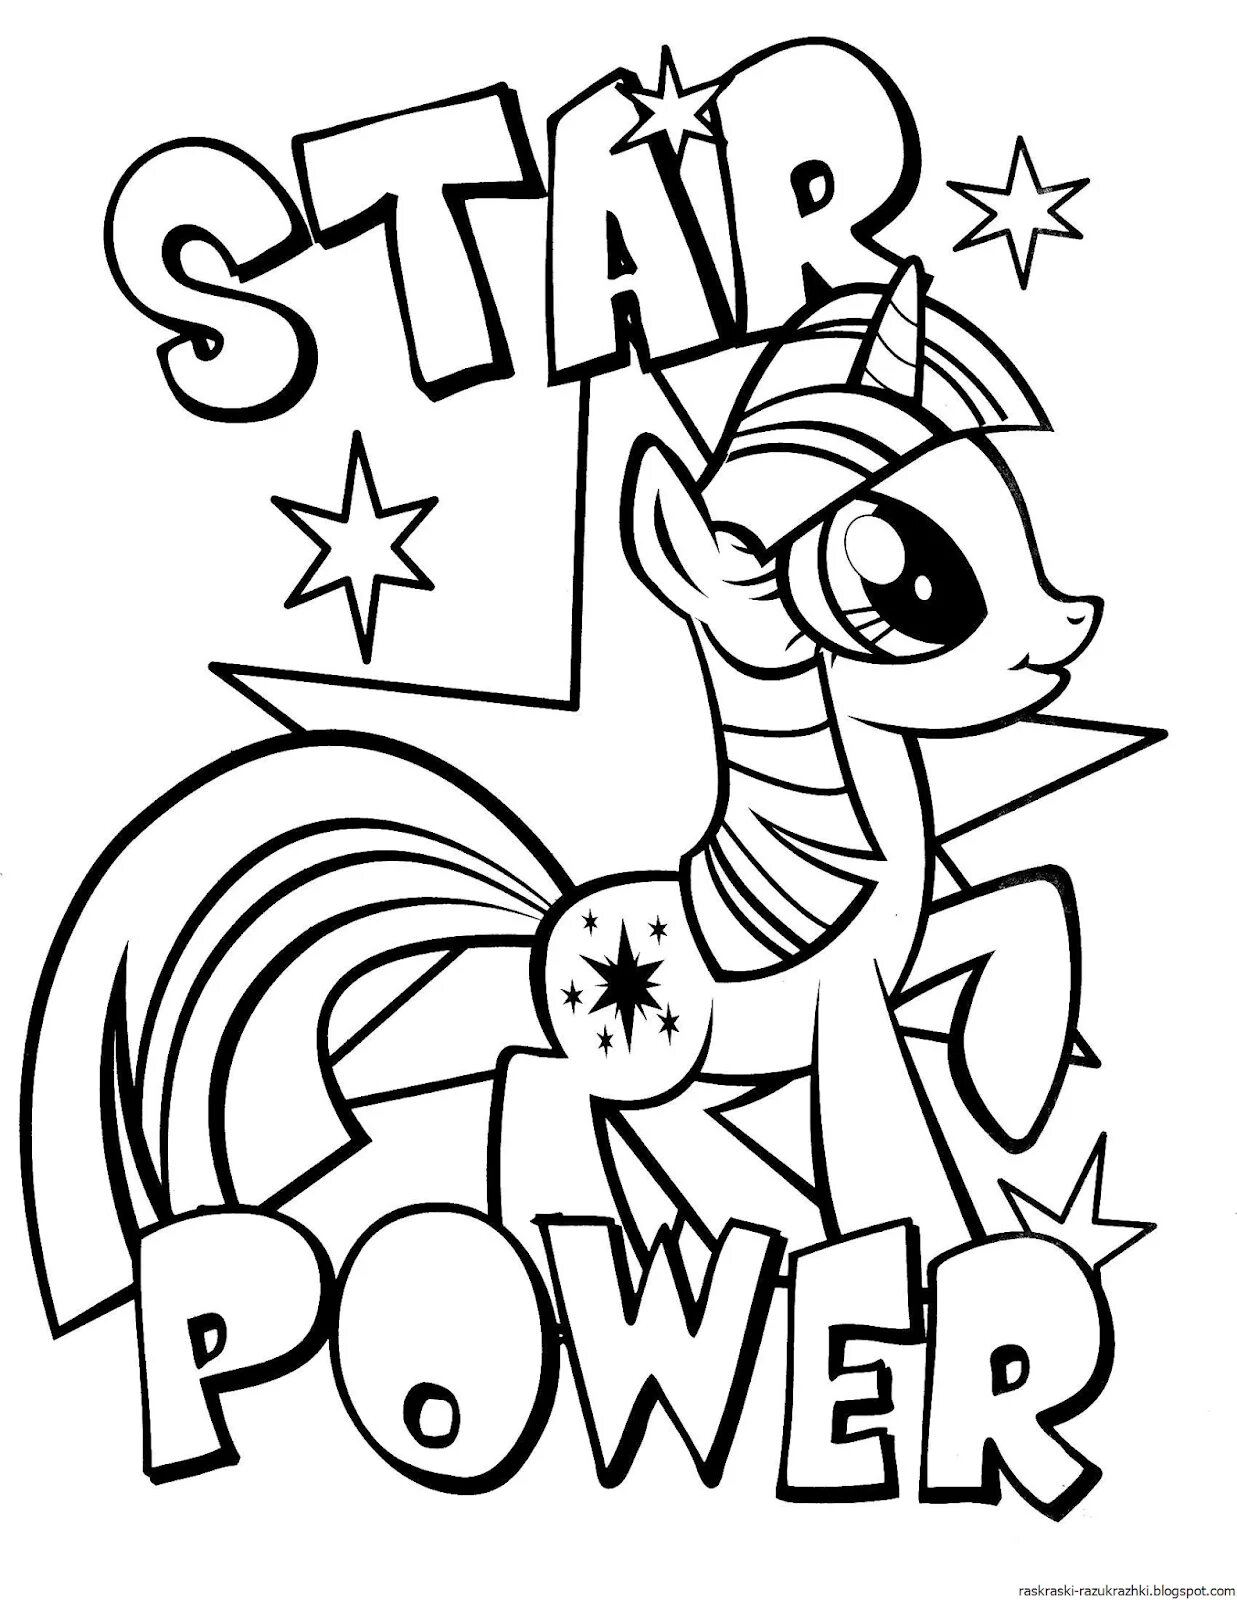 Exciting little pony coloring book